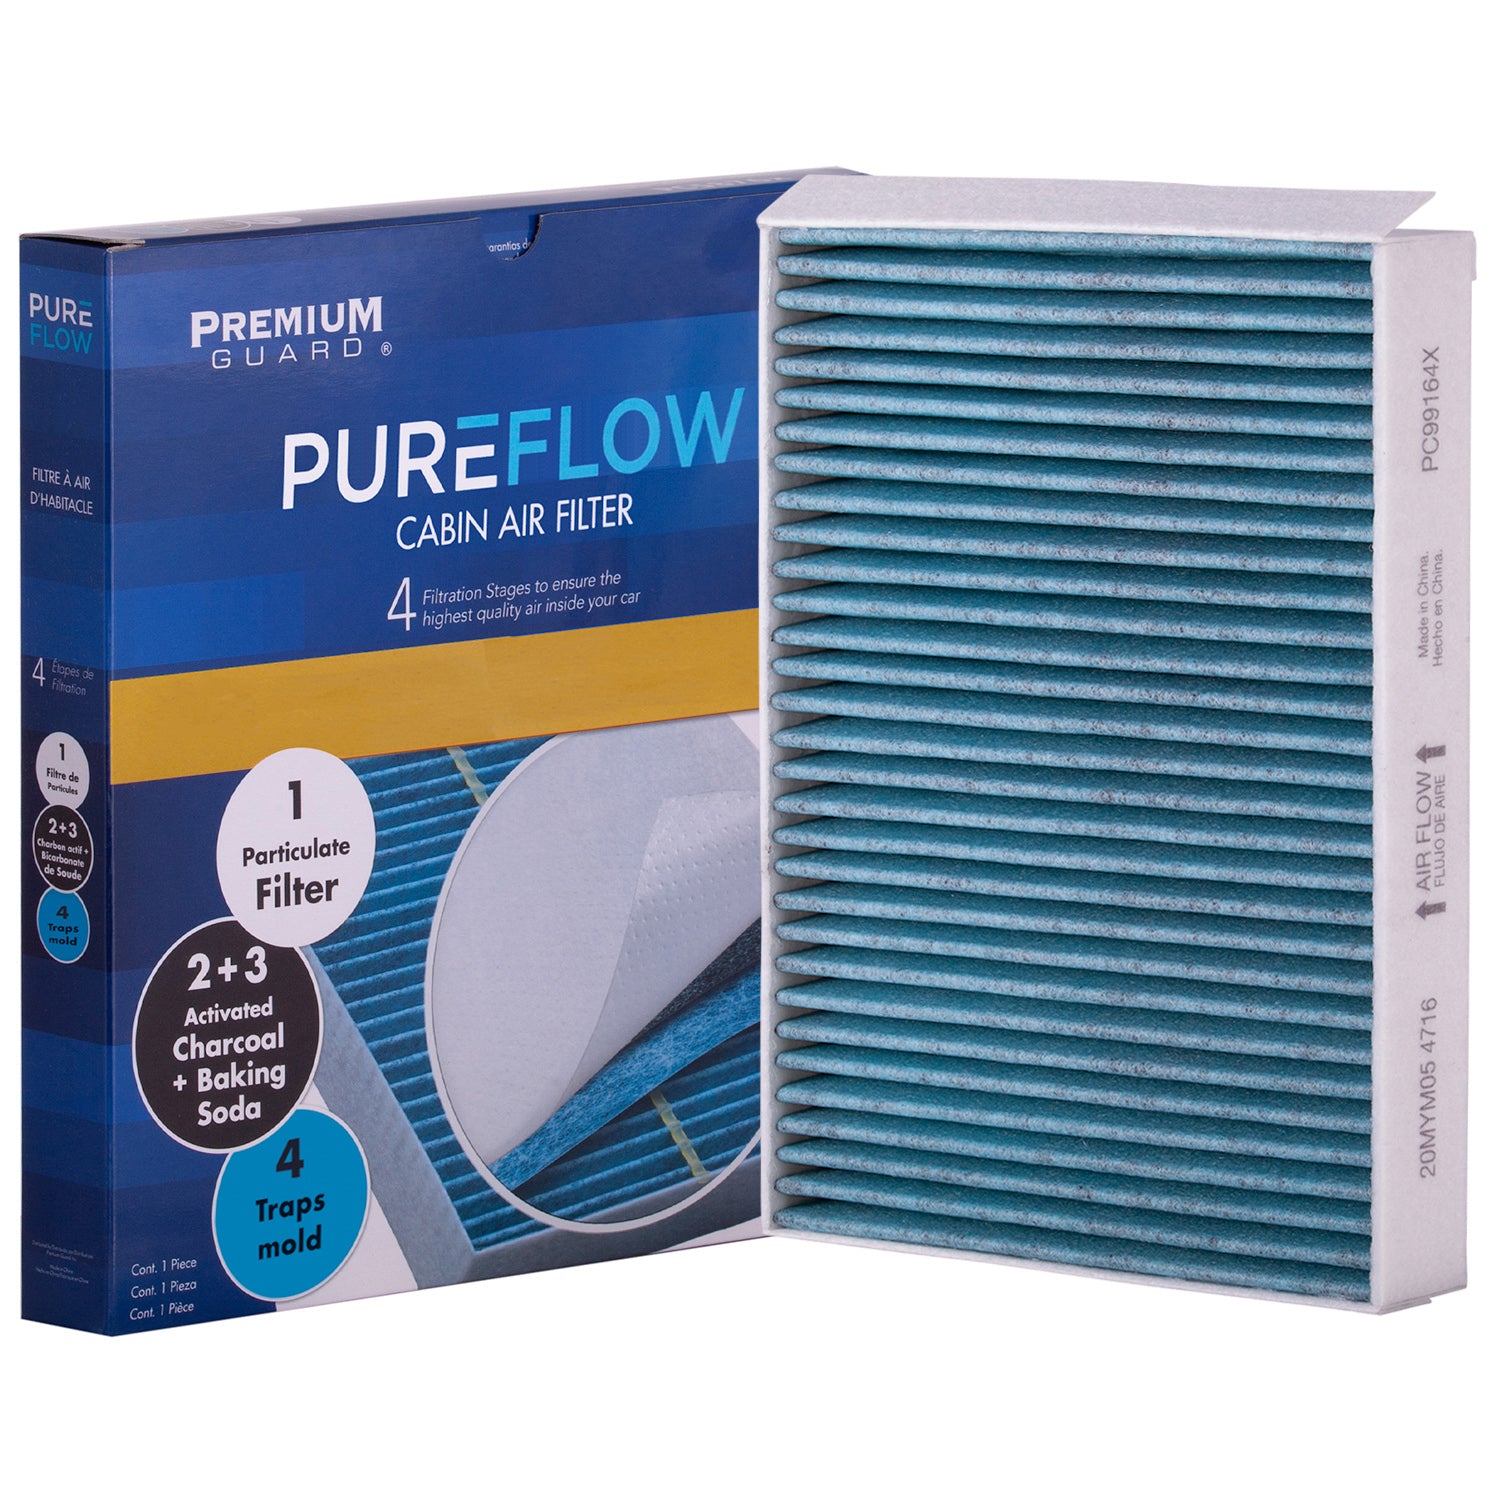 PUREFLOW 2019 Mercedes-Benz GLS550 Cabin Air Filter with Antibacterial Technology, PC99164X